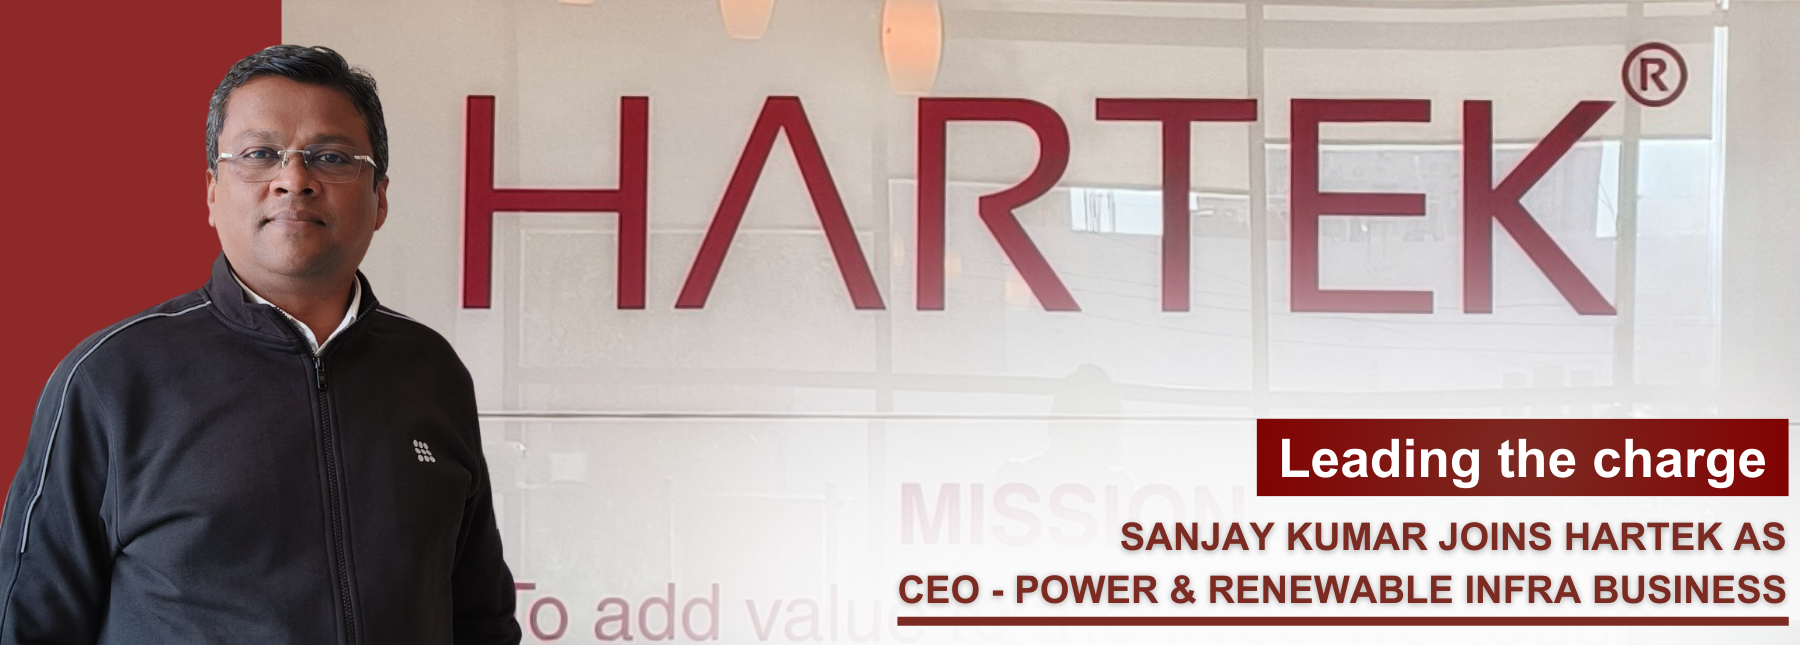 Hartek Group Appoints Sanjay Kumar as CEO for Power and Renewable Infra Business